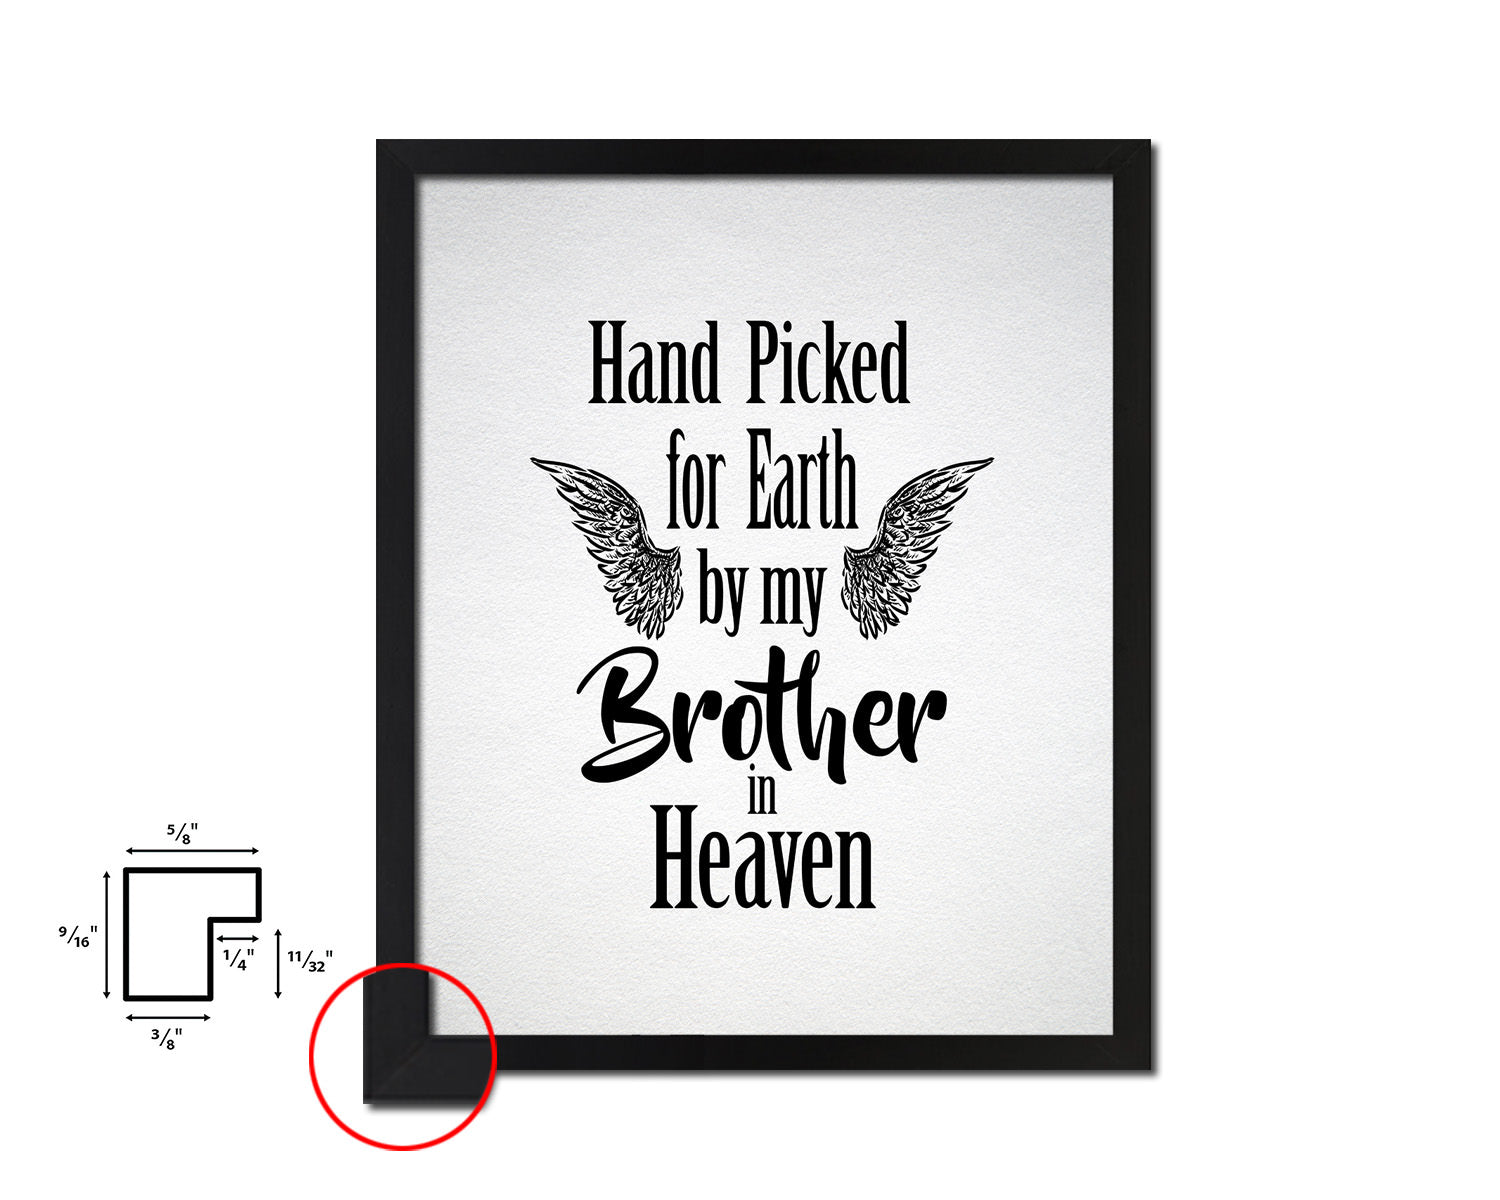 Hand picked for earth by our brother in heaven Quote Framed Print Wall Art Decor Gifts